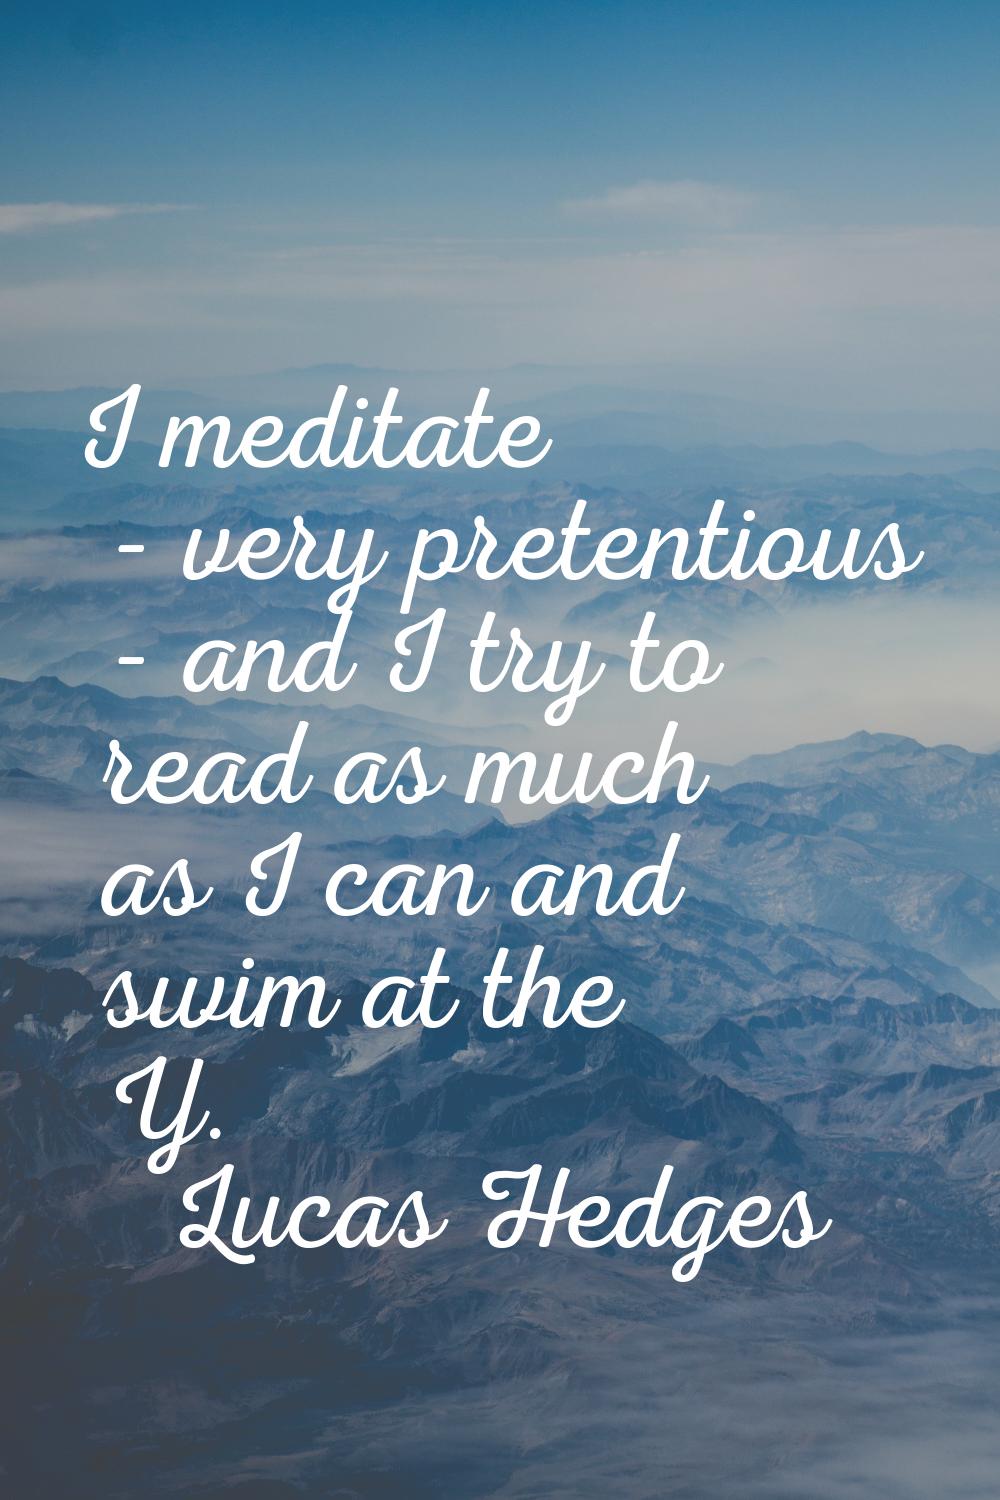 I meditate - very pretentious - and I try to read as much as I can and swim at the Y.